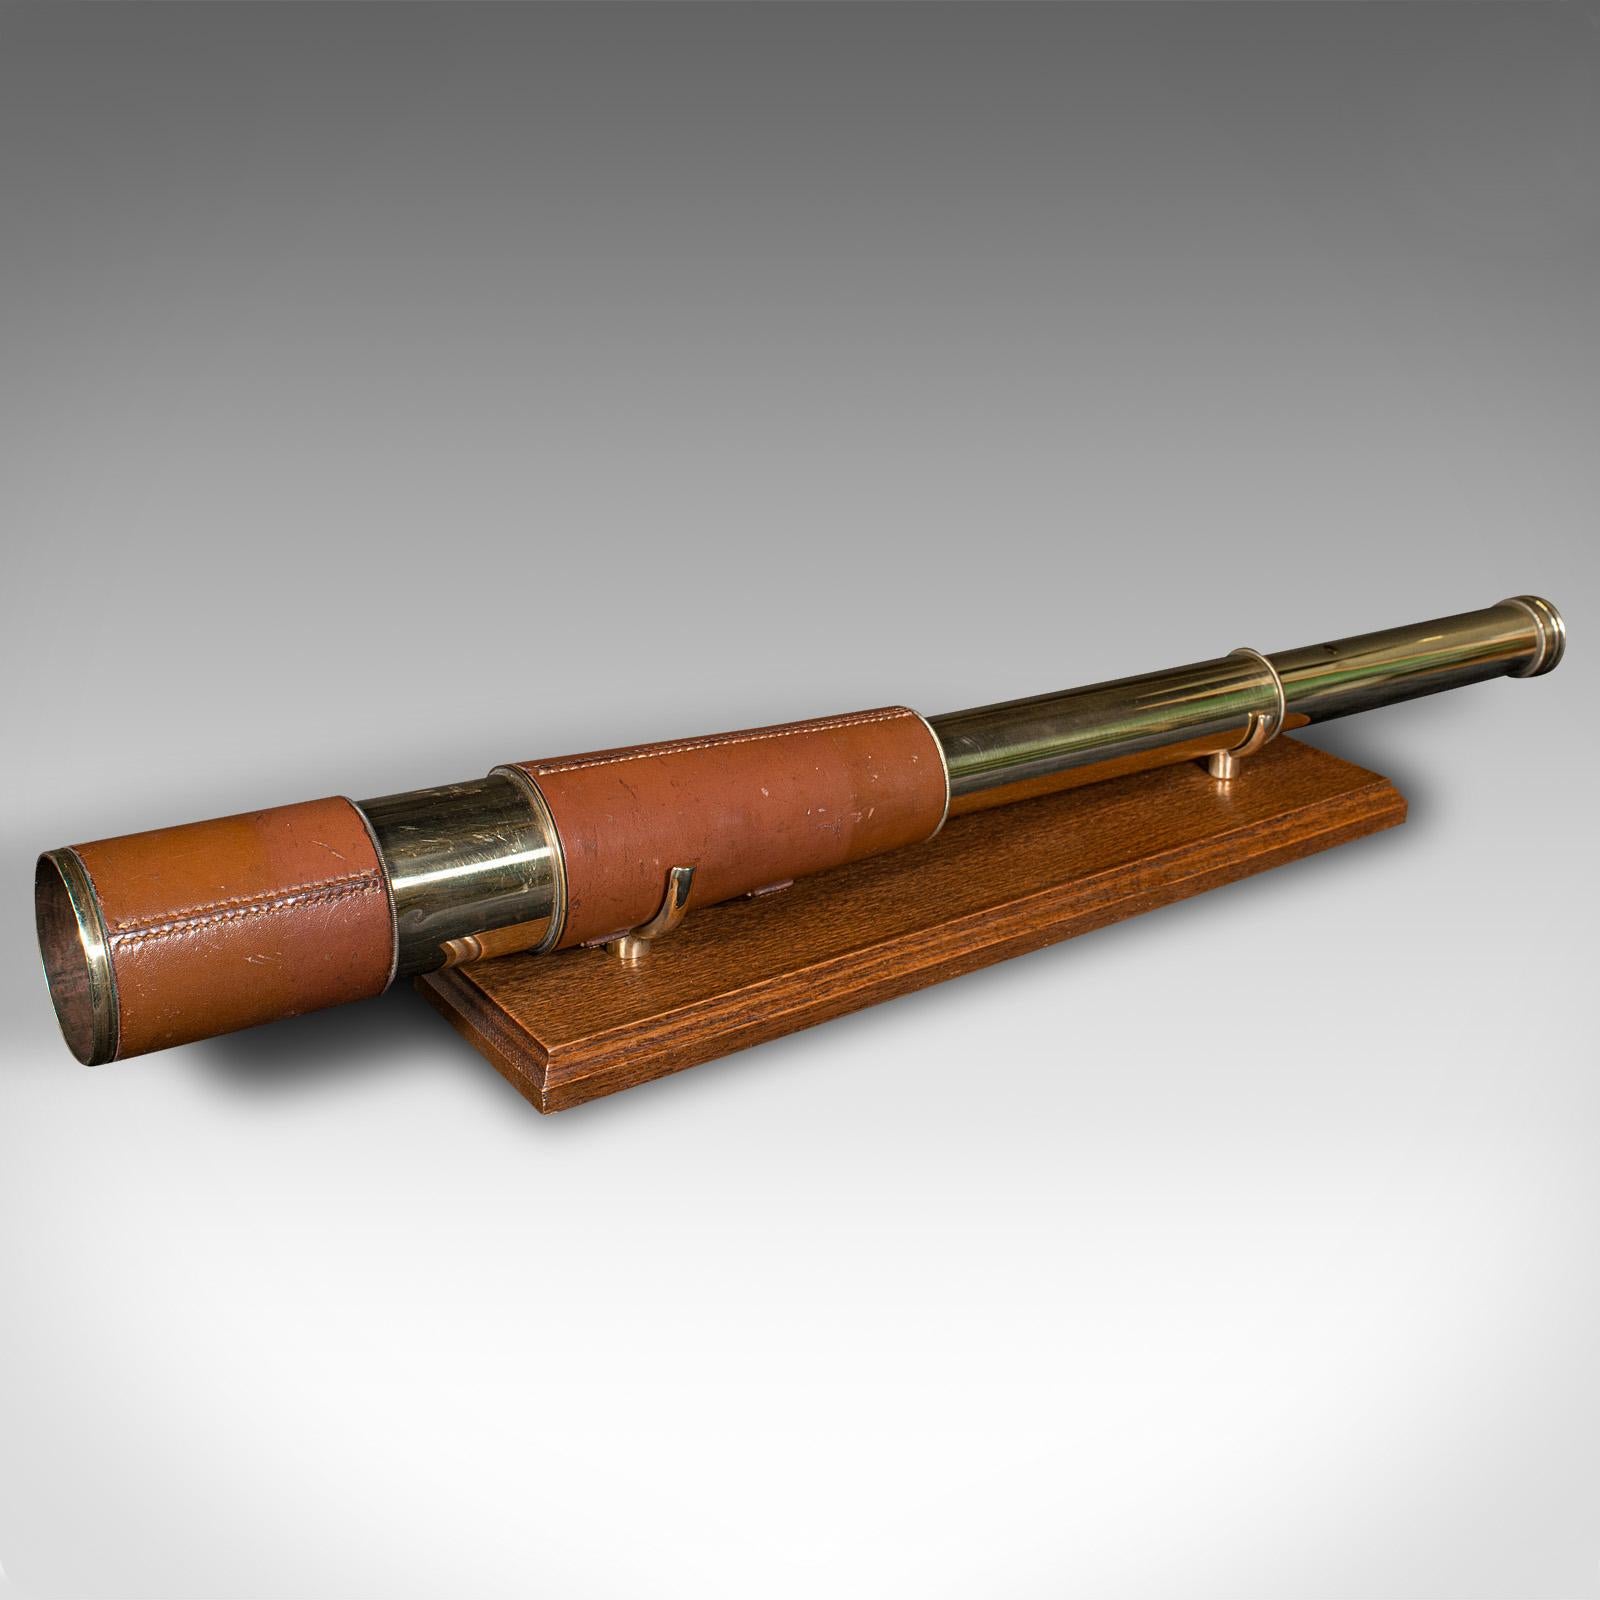 This is an antique 3-draw telescope. An English, brass terrestrial spotter's refractor in leather case, dating to the Great War period, circa 1915.

Perfect for bird watching, landscape appreciation, wildlife, or maritime observation. Equally